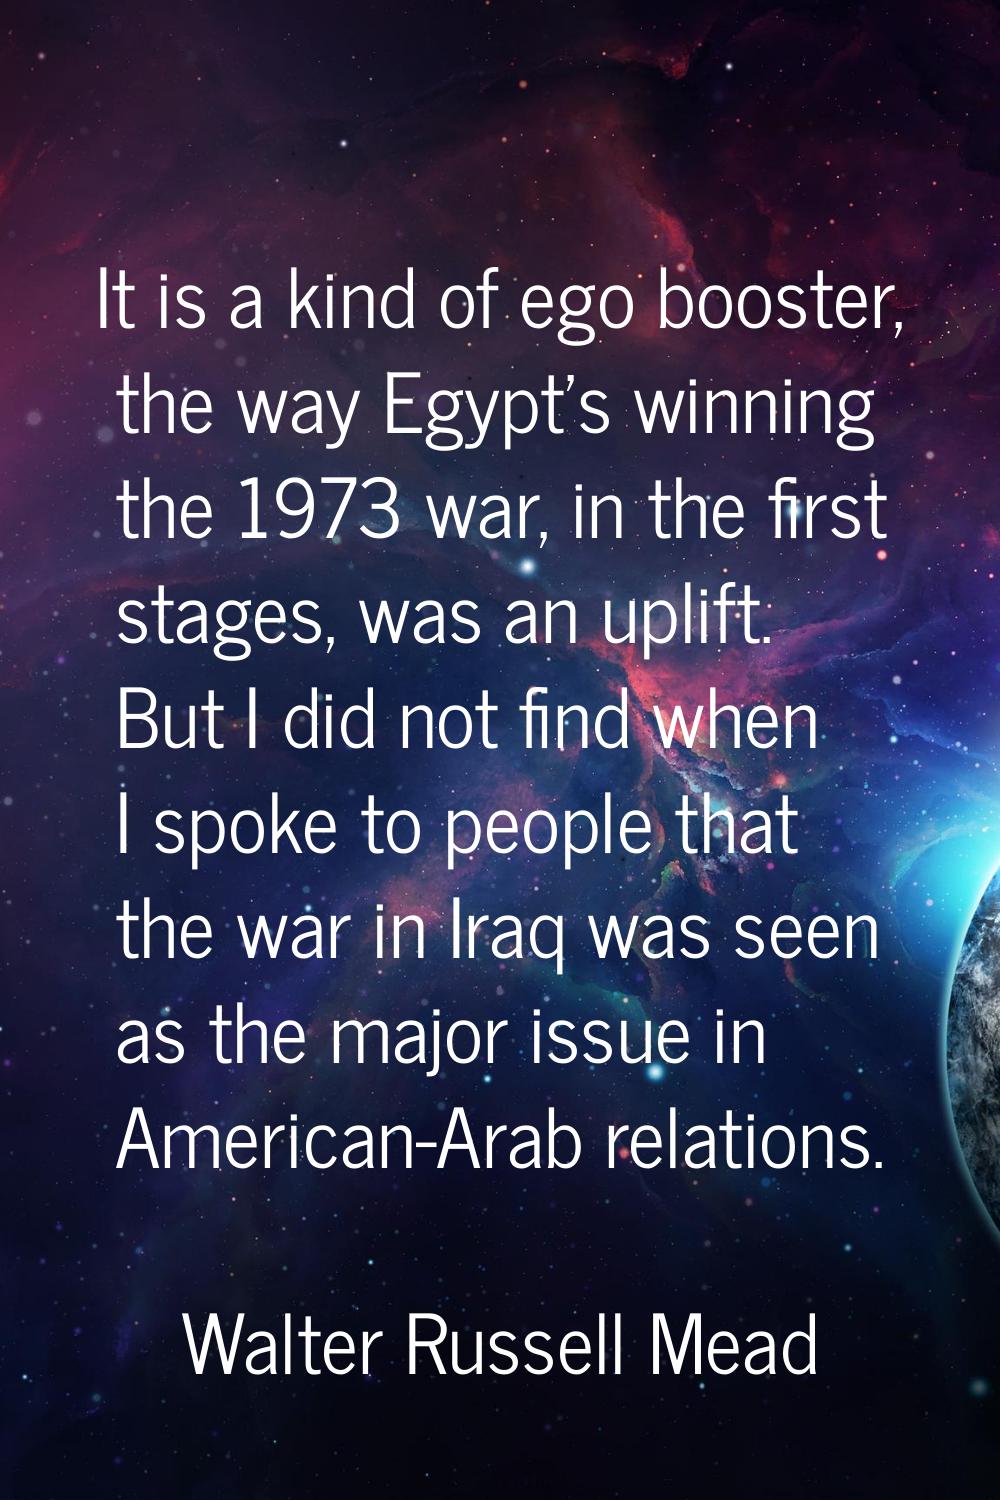 It is a kind of ego booster, the way Egypt's winning the 1973 war, in the first stages, was an upli